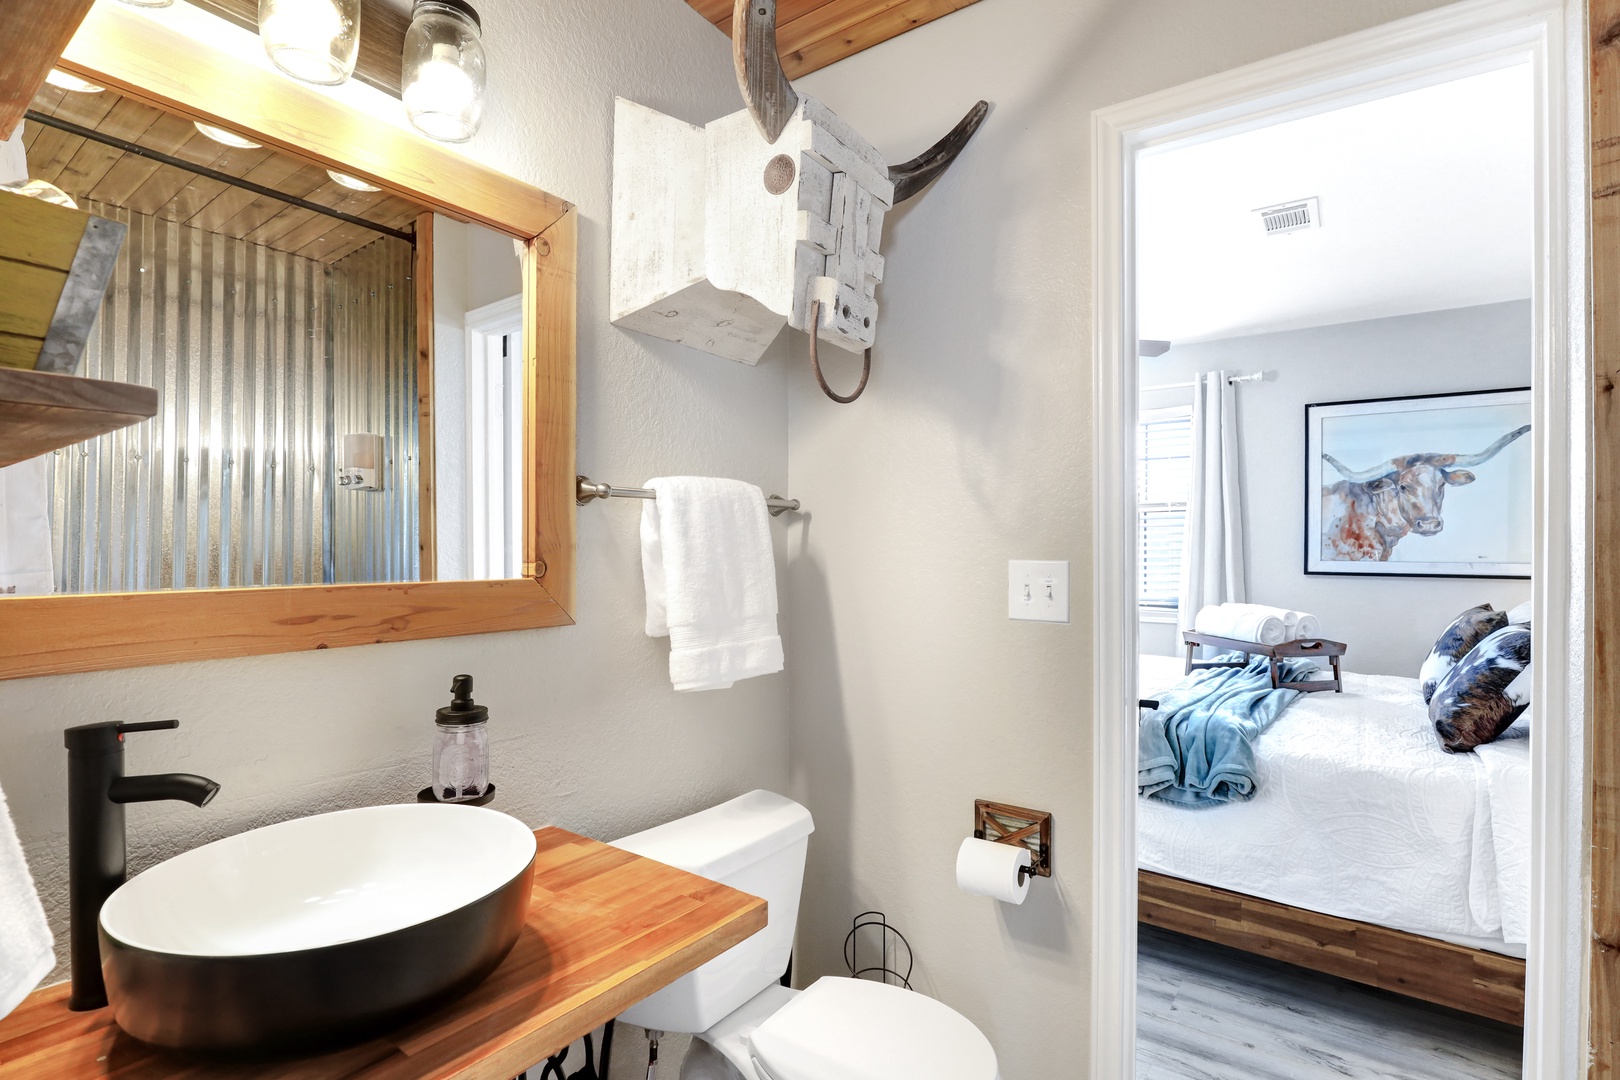 The upstairs Jack & Jill bathroom includes a chic vanity & shower/tub combo